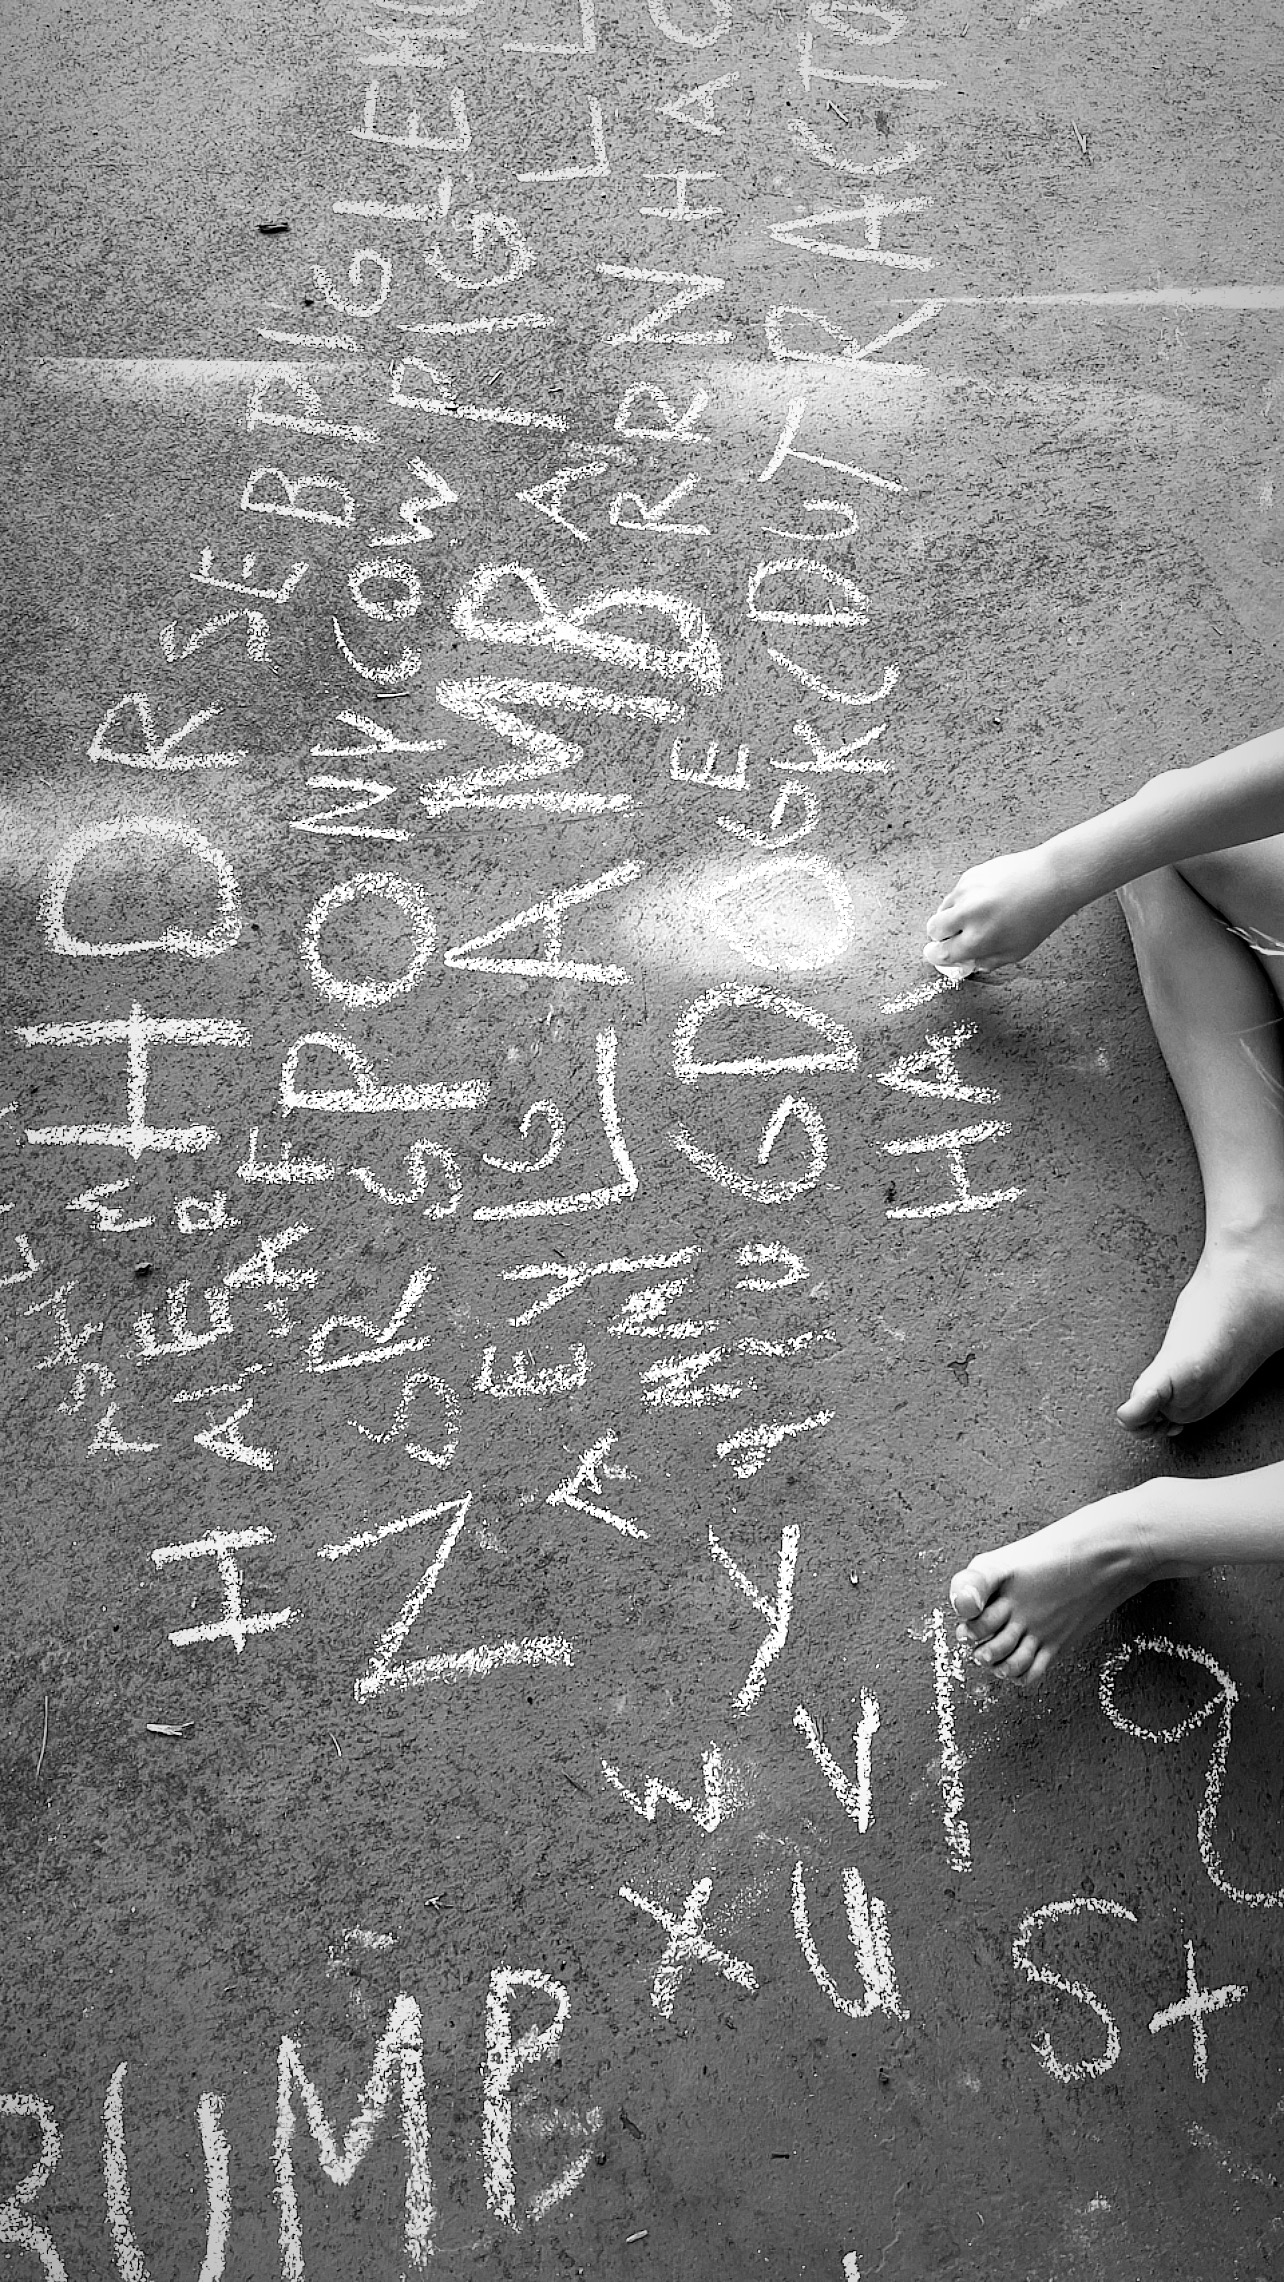 Black and white image of toddler writing the alphabet on the concrete during lockdown in Hawaii in 2020.